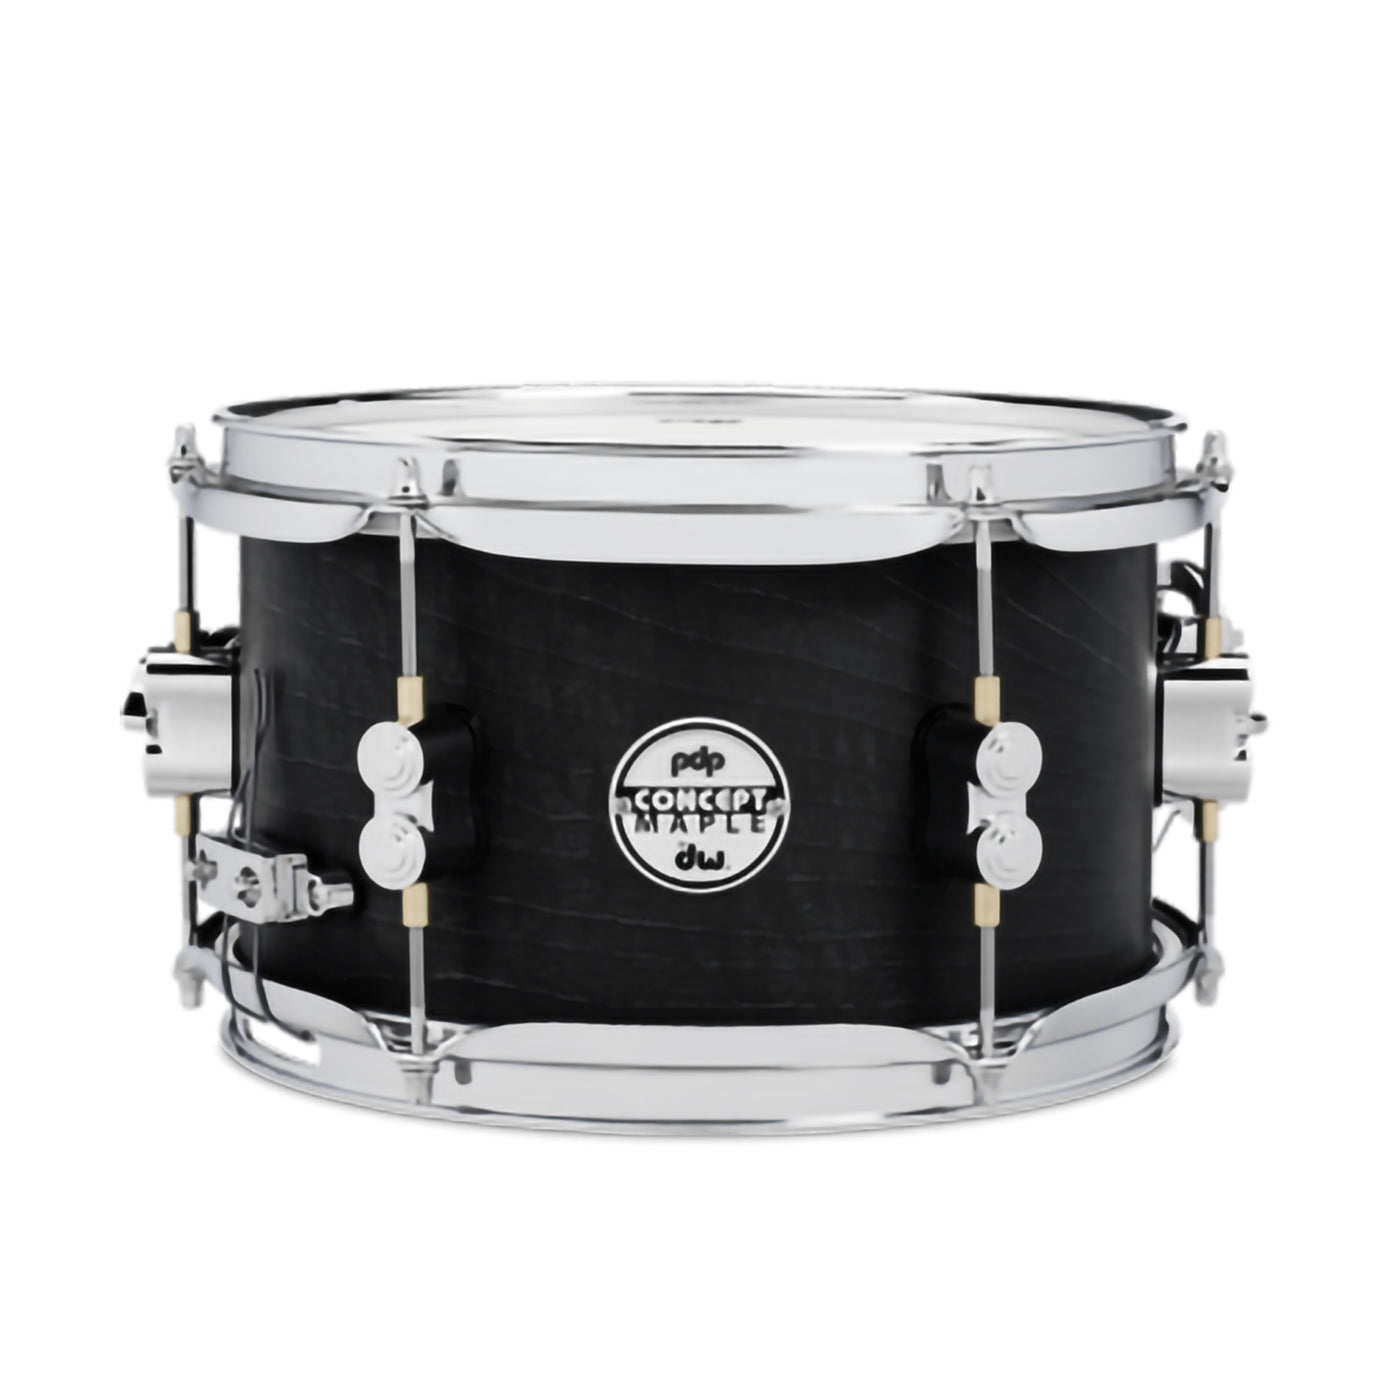 DW PDP Concept Snare 6" X 10" Black Wax Snare Drum